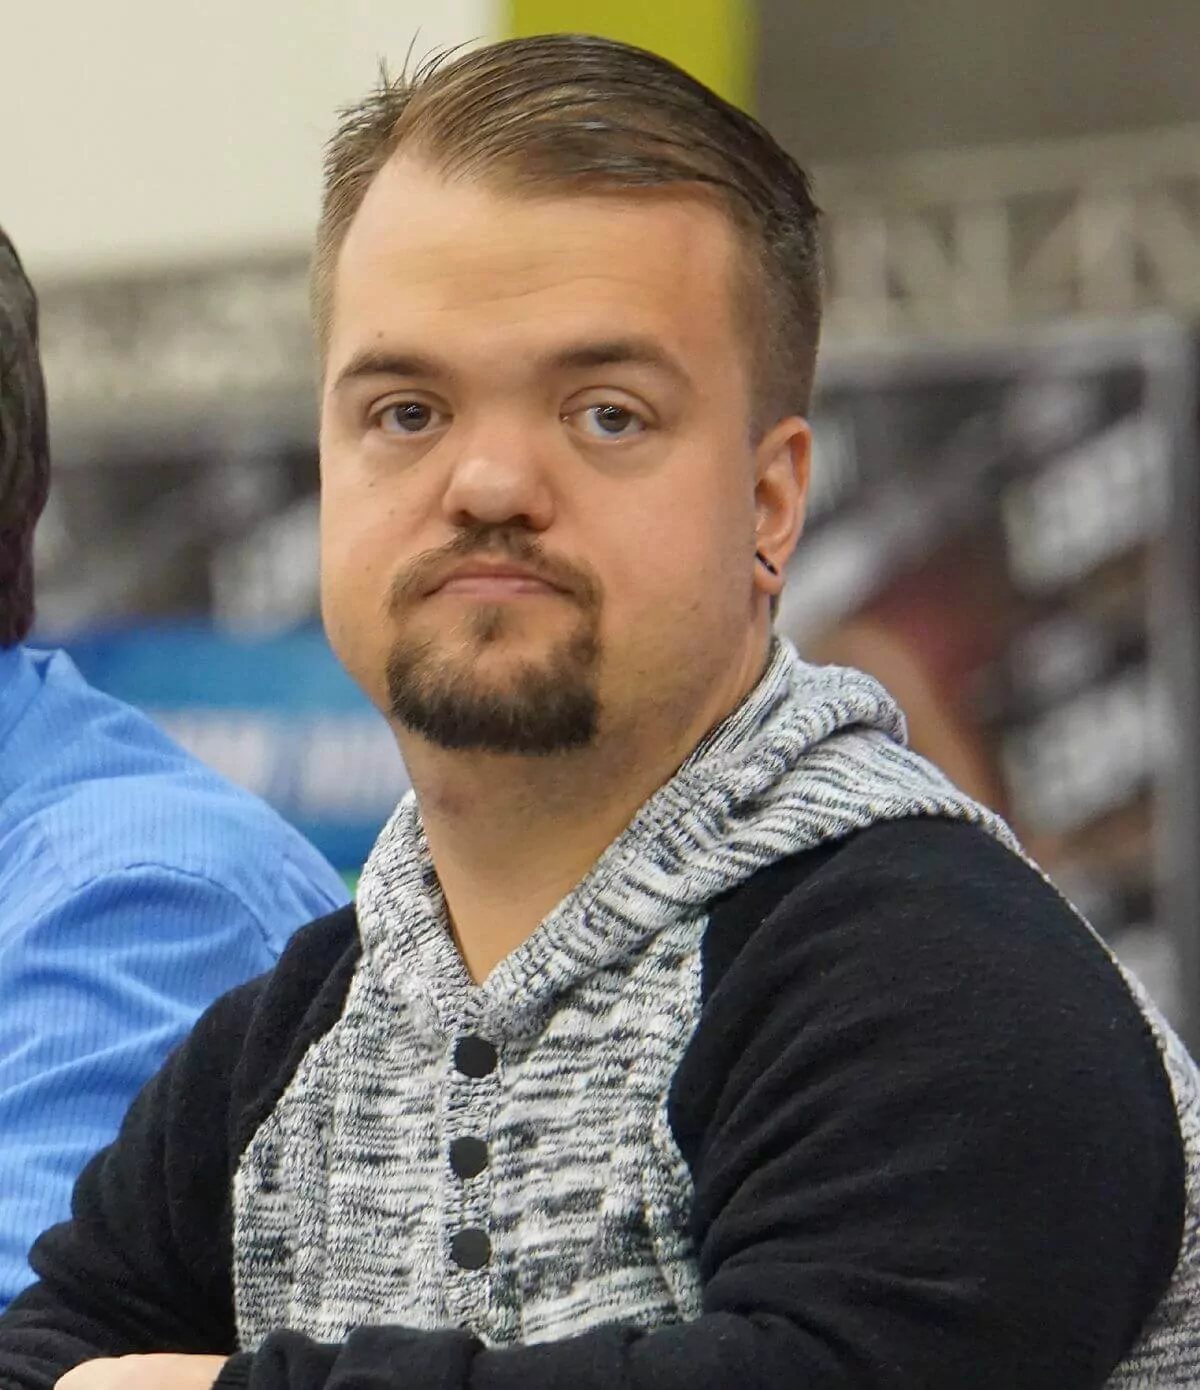 Hornswoggle in Real Life